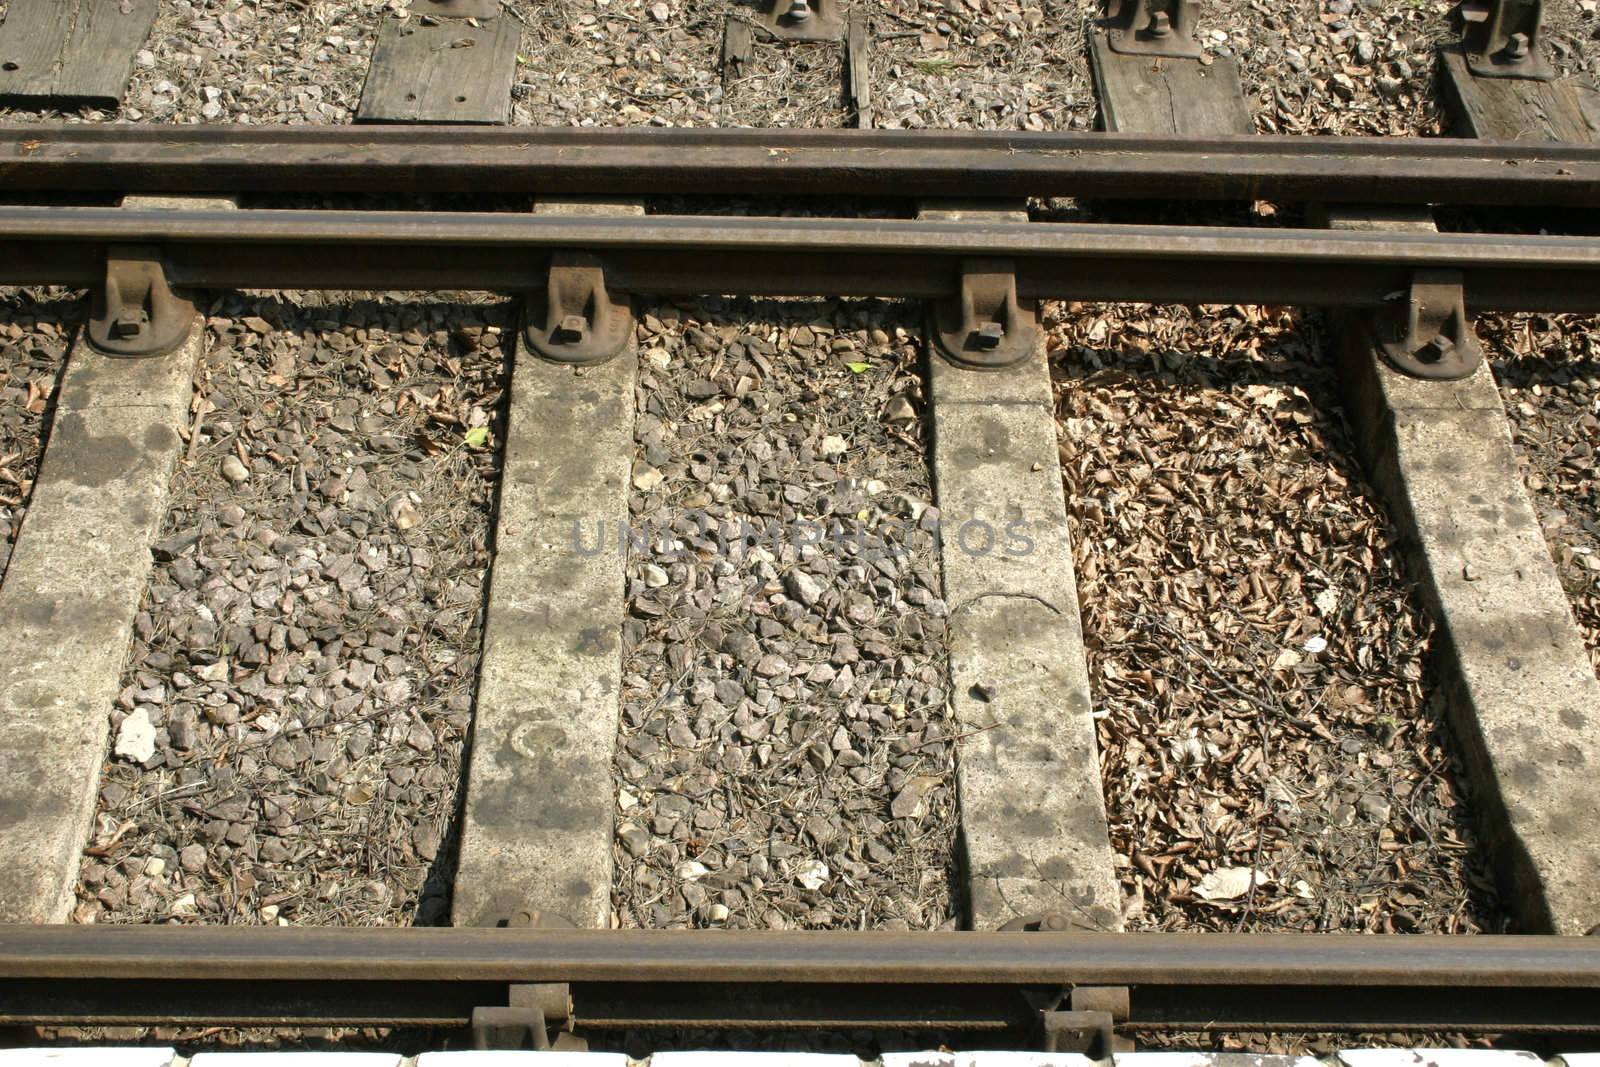 details of the railway track with gravel in between the wooden sleepers